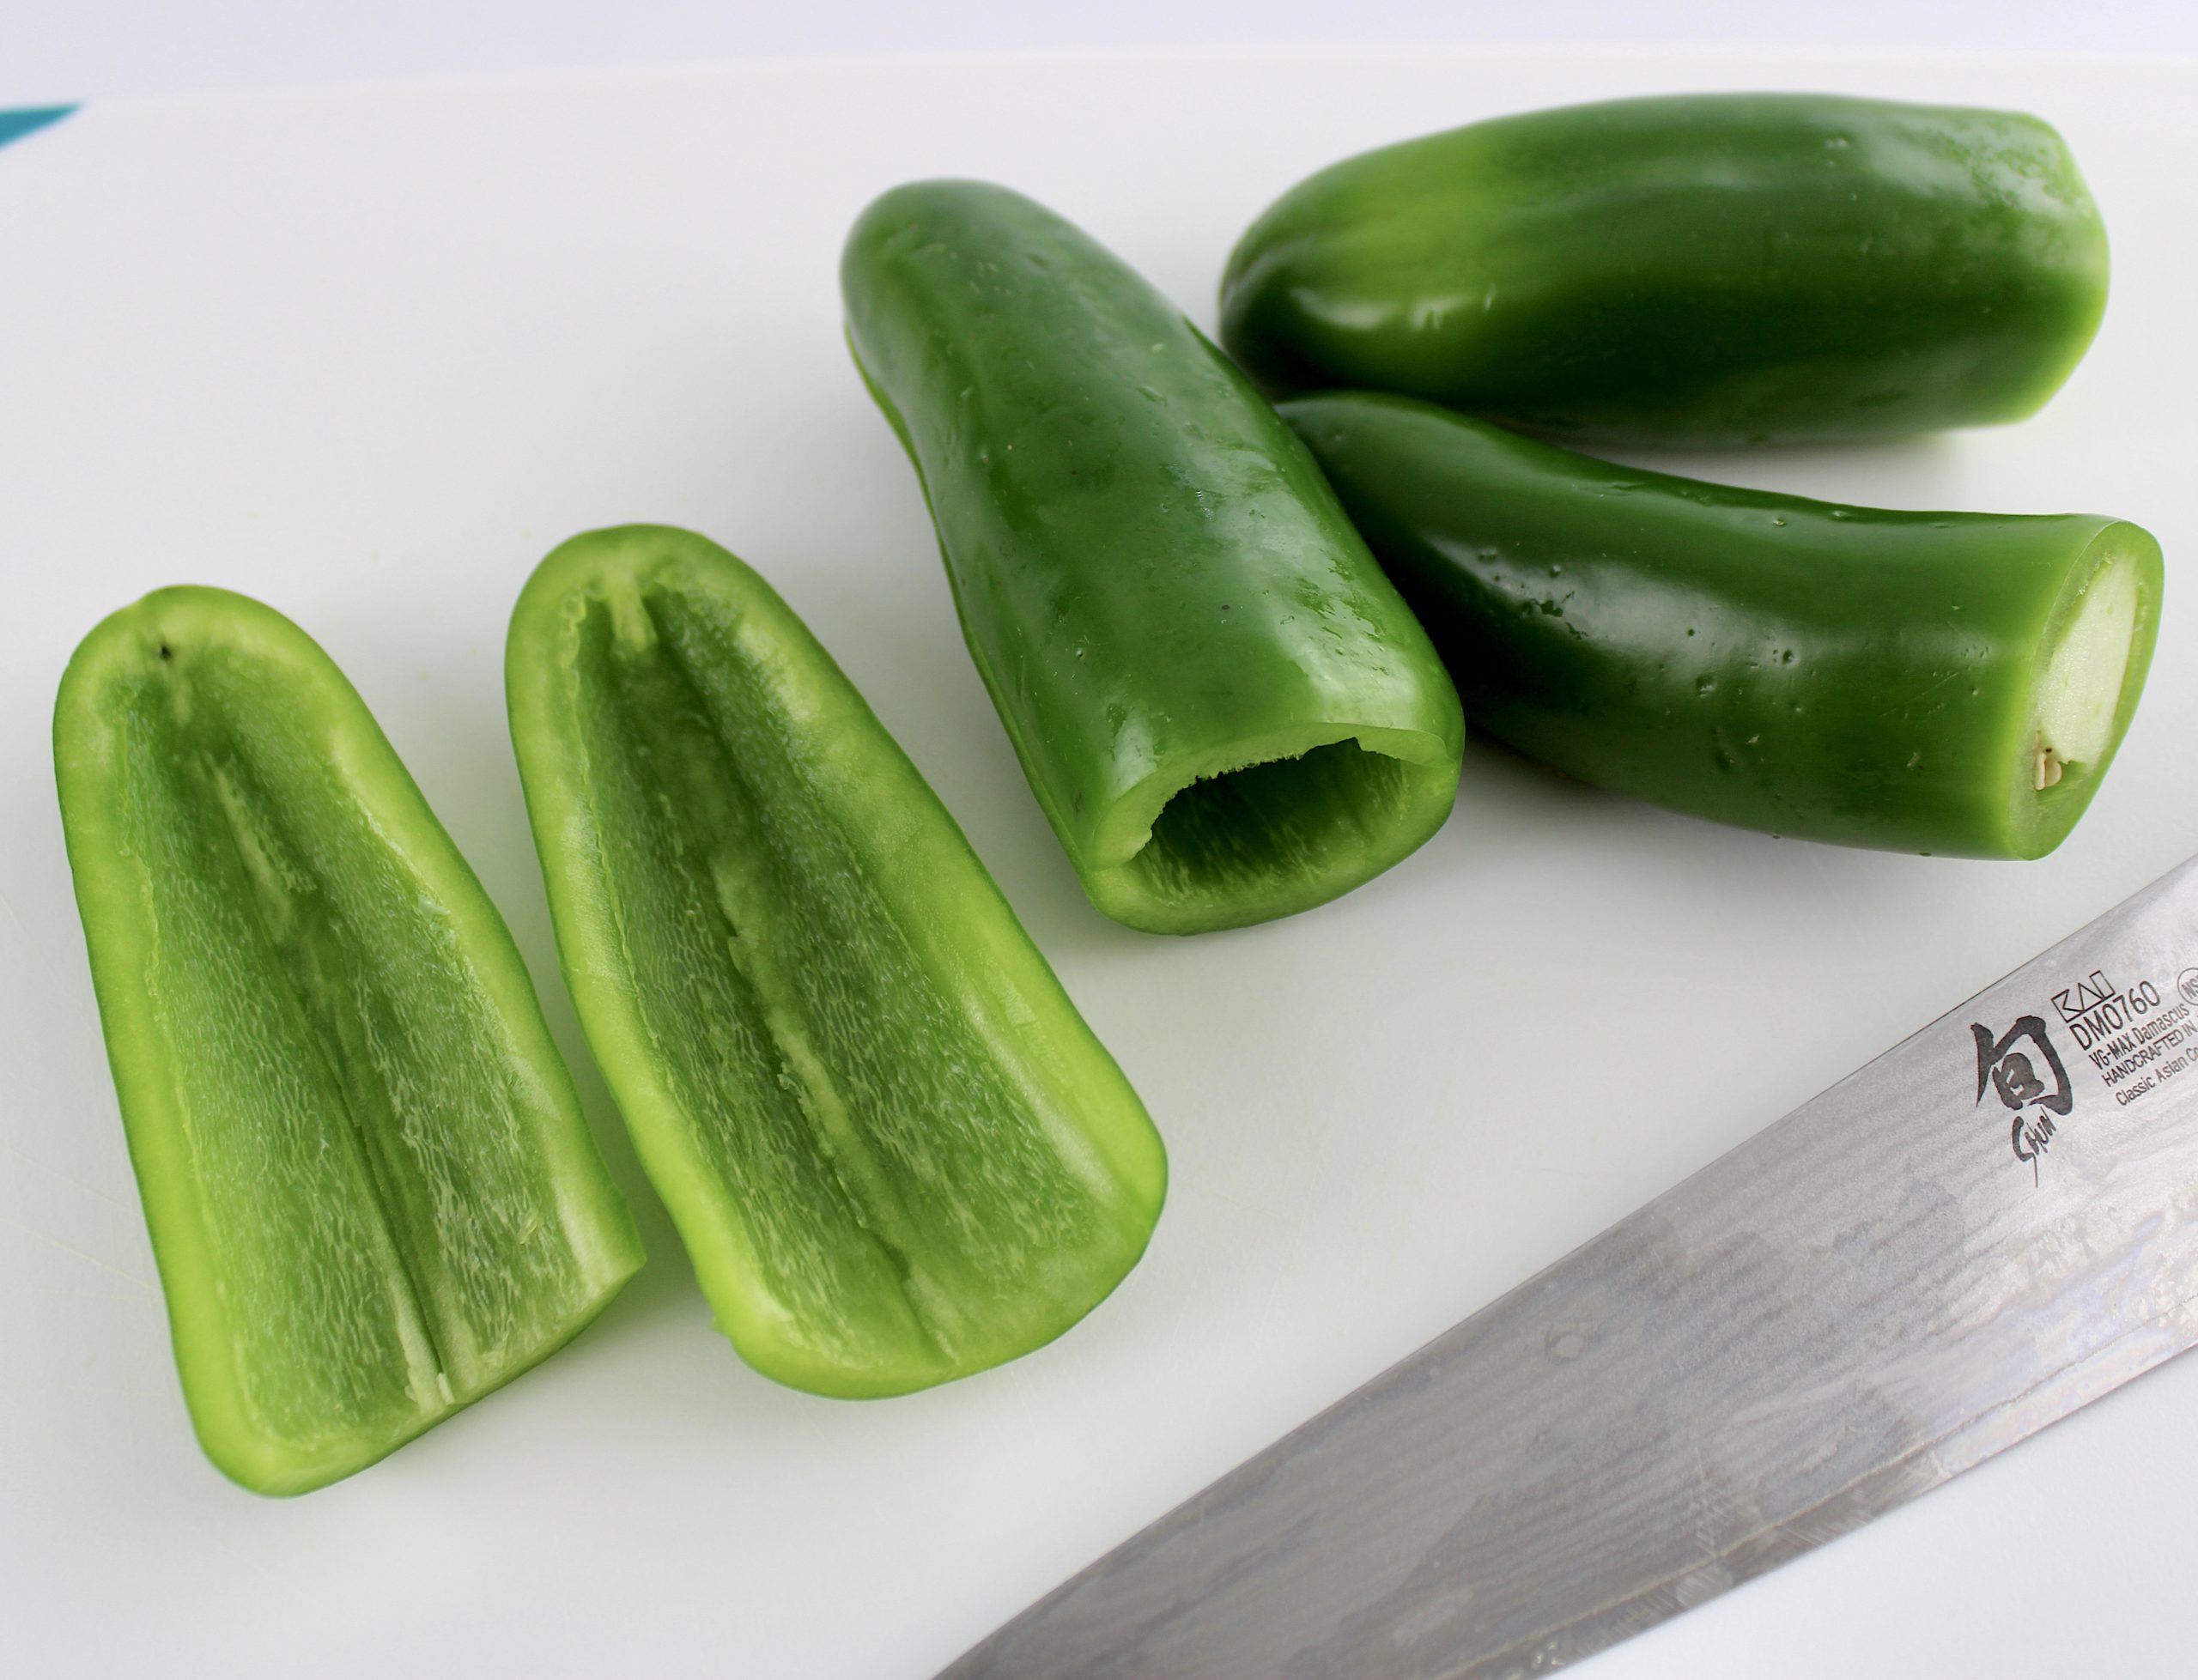 4 jalapeño peppers sliced in half on cutting board with knife